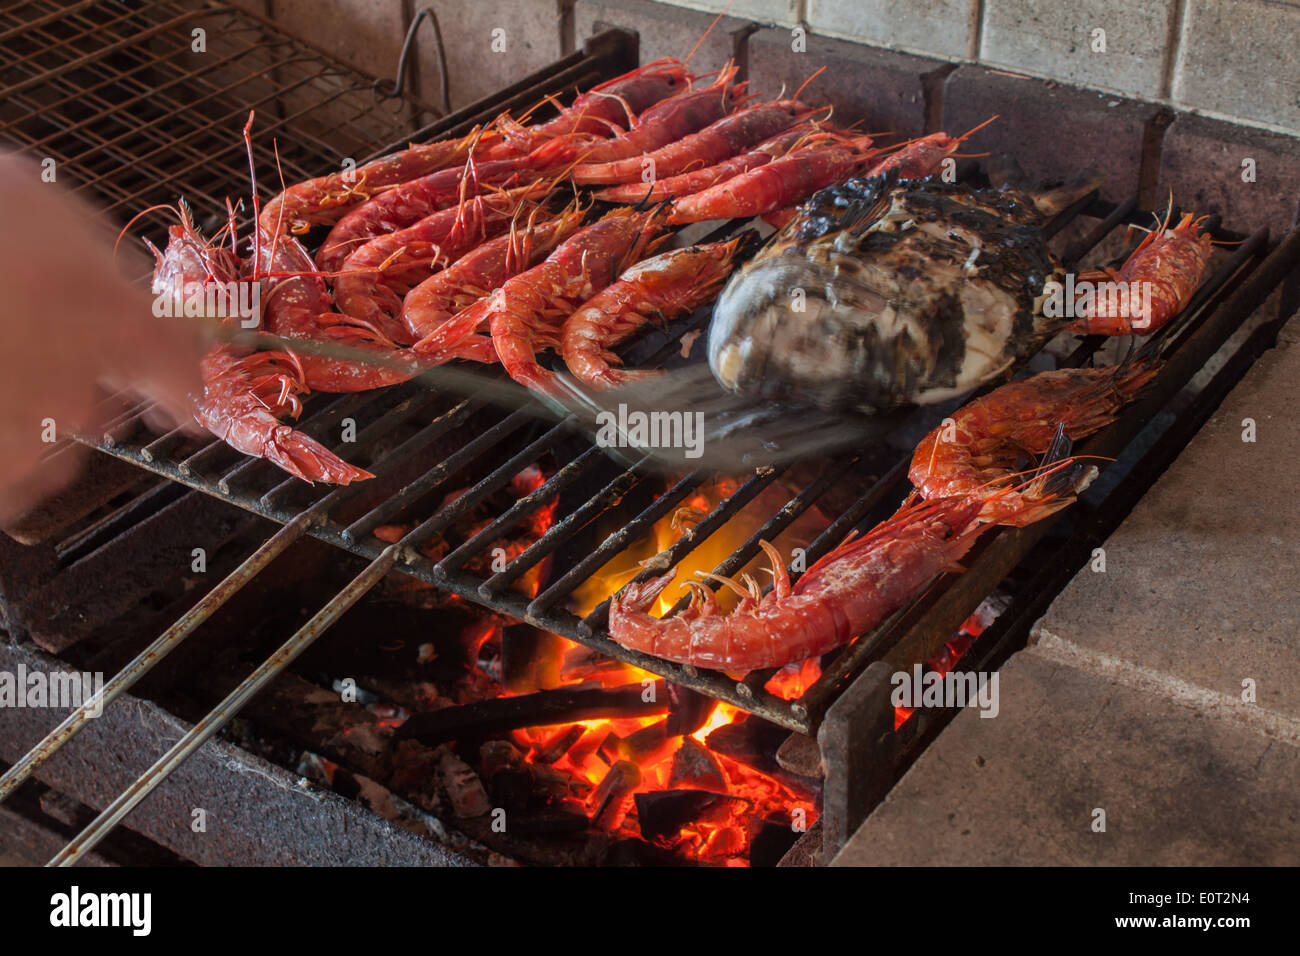 hand cooking shrimps shellfish seafood grill barbecue closeup fish 'sea bream' flame coal fire Stock Photo